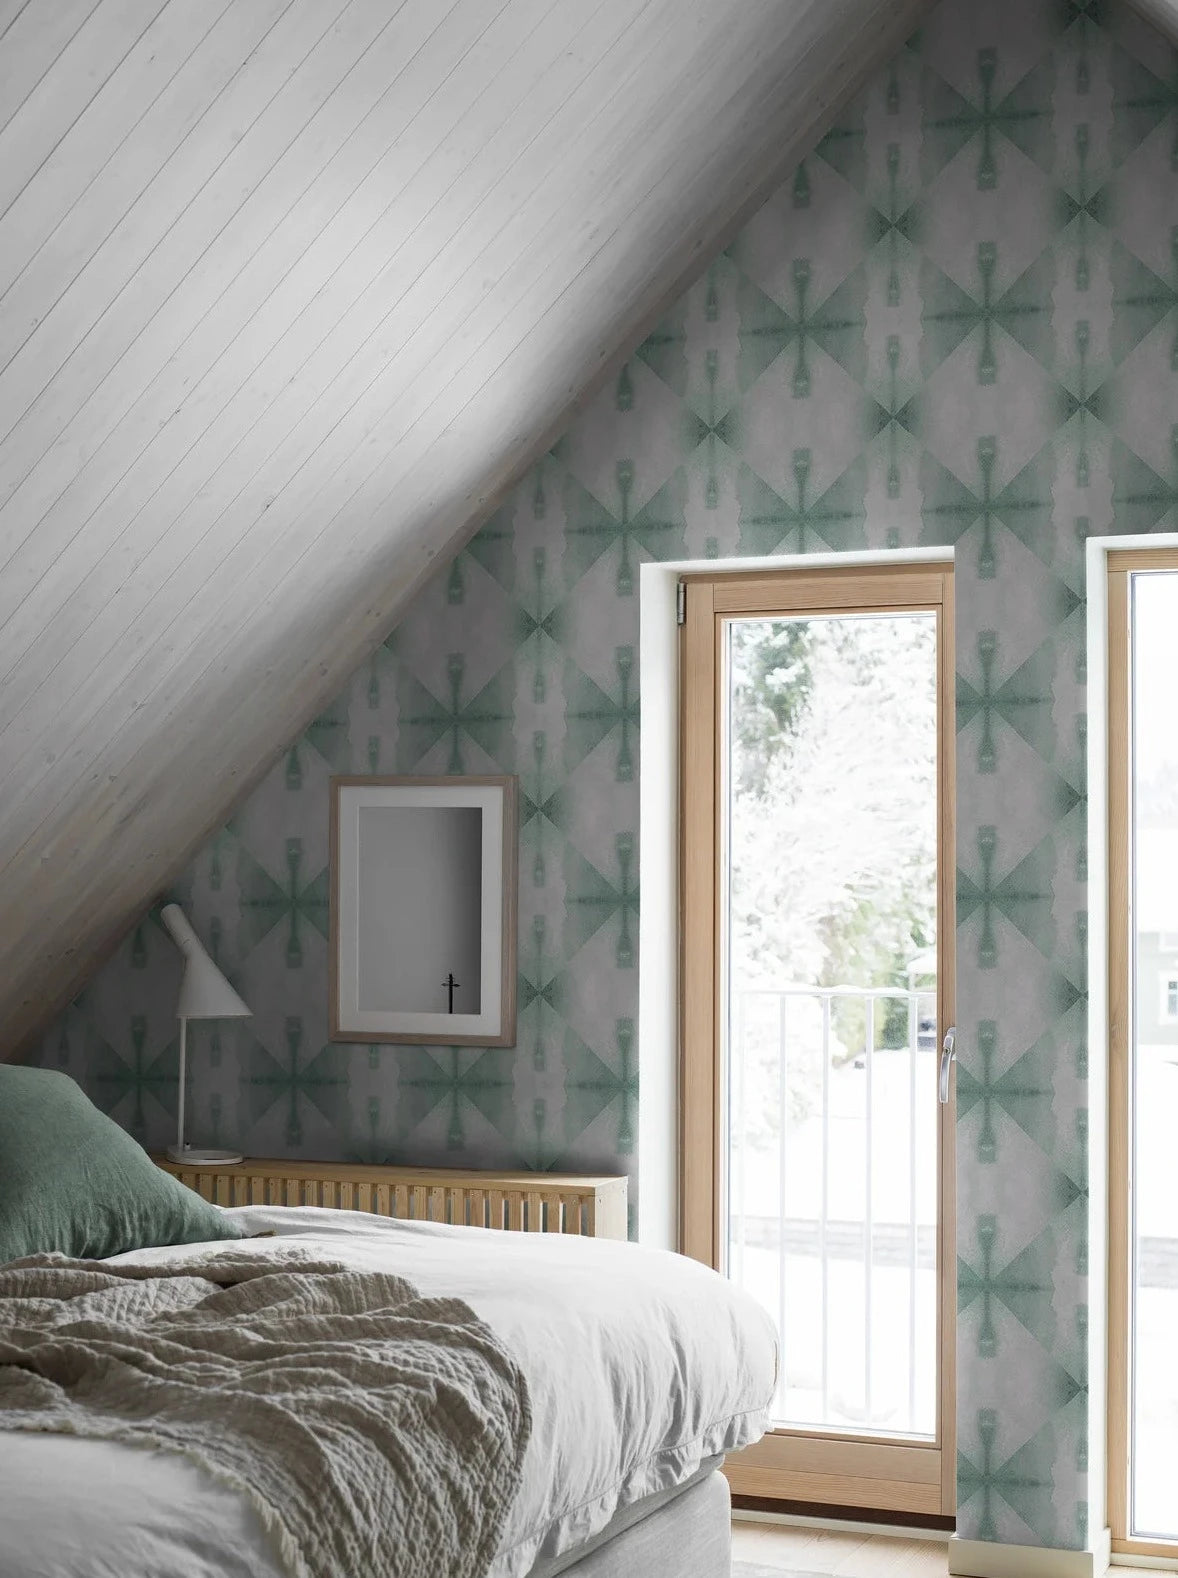 Wallpaper Shibori has a geometric pattern based on folded paper that is then softly colored – in this case in soft Tea Green.